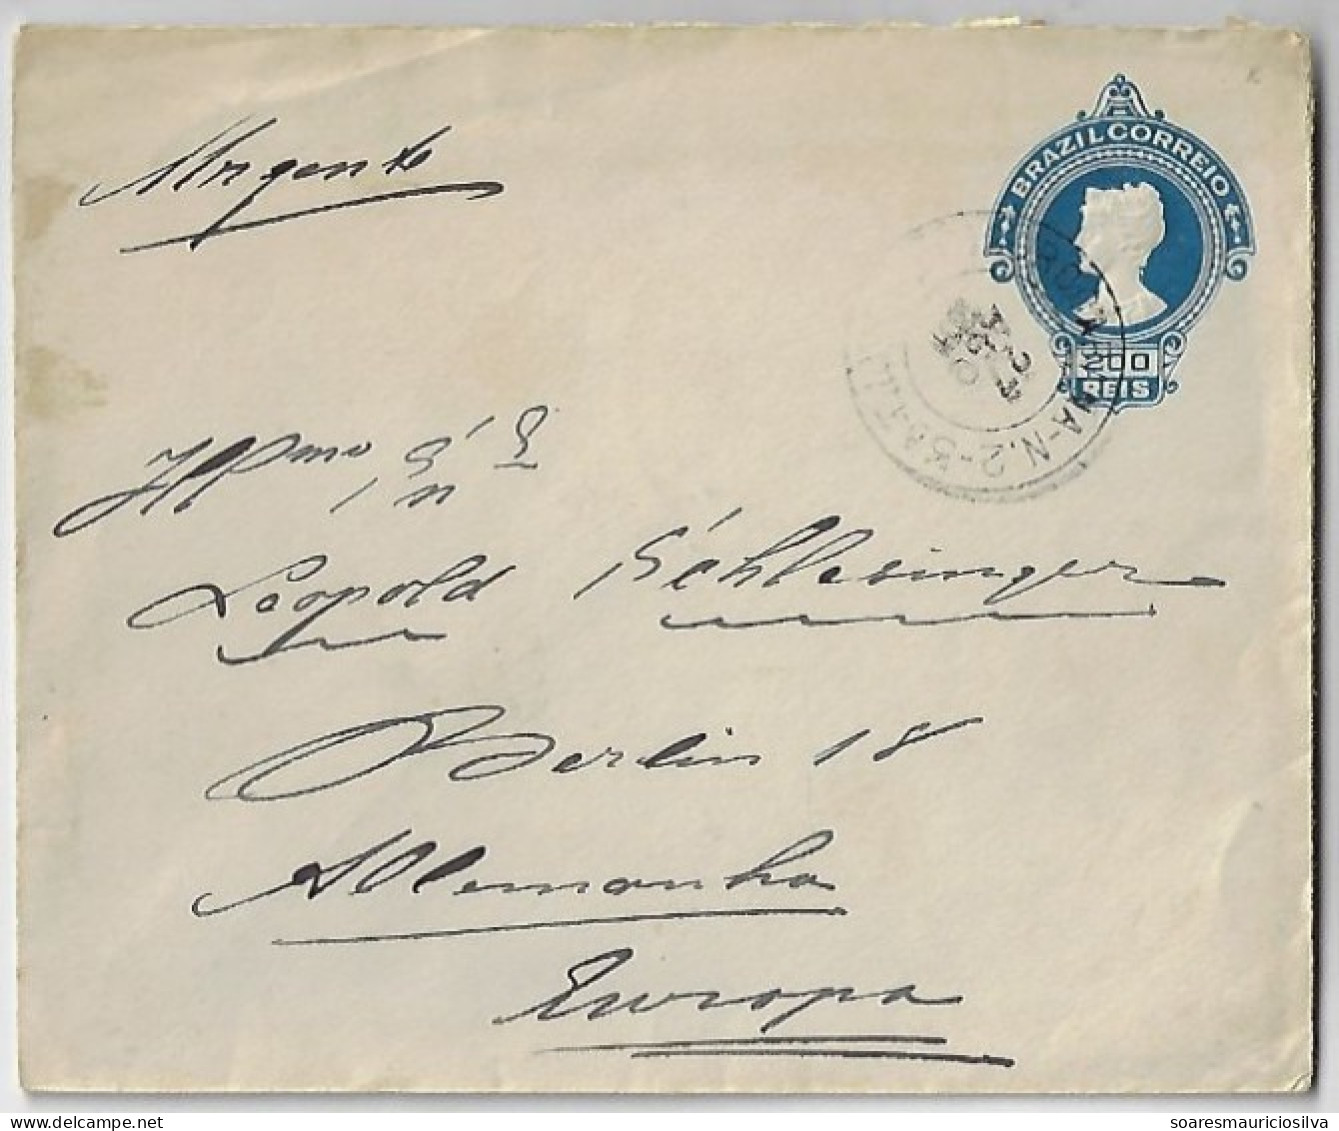 Brazil 1910s Postal Stationery Cover Stamp 200 Réis Sent From Carambeí To Berlin Germany Cancel Sorocabana Railway - Entiers Postaux